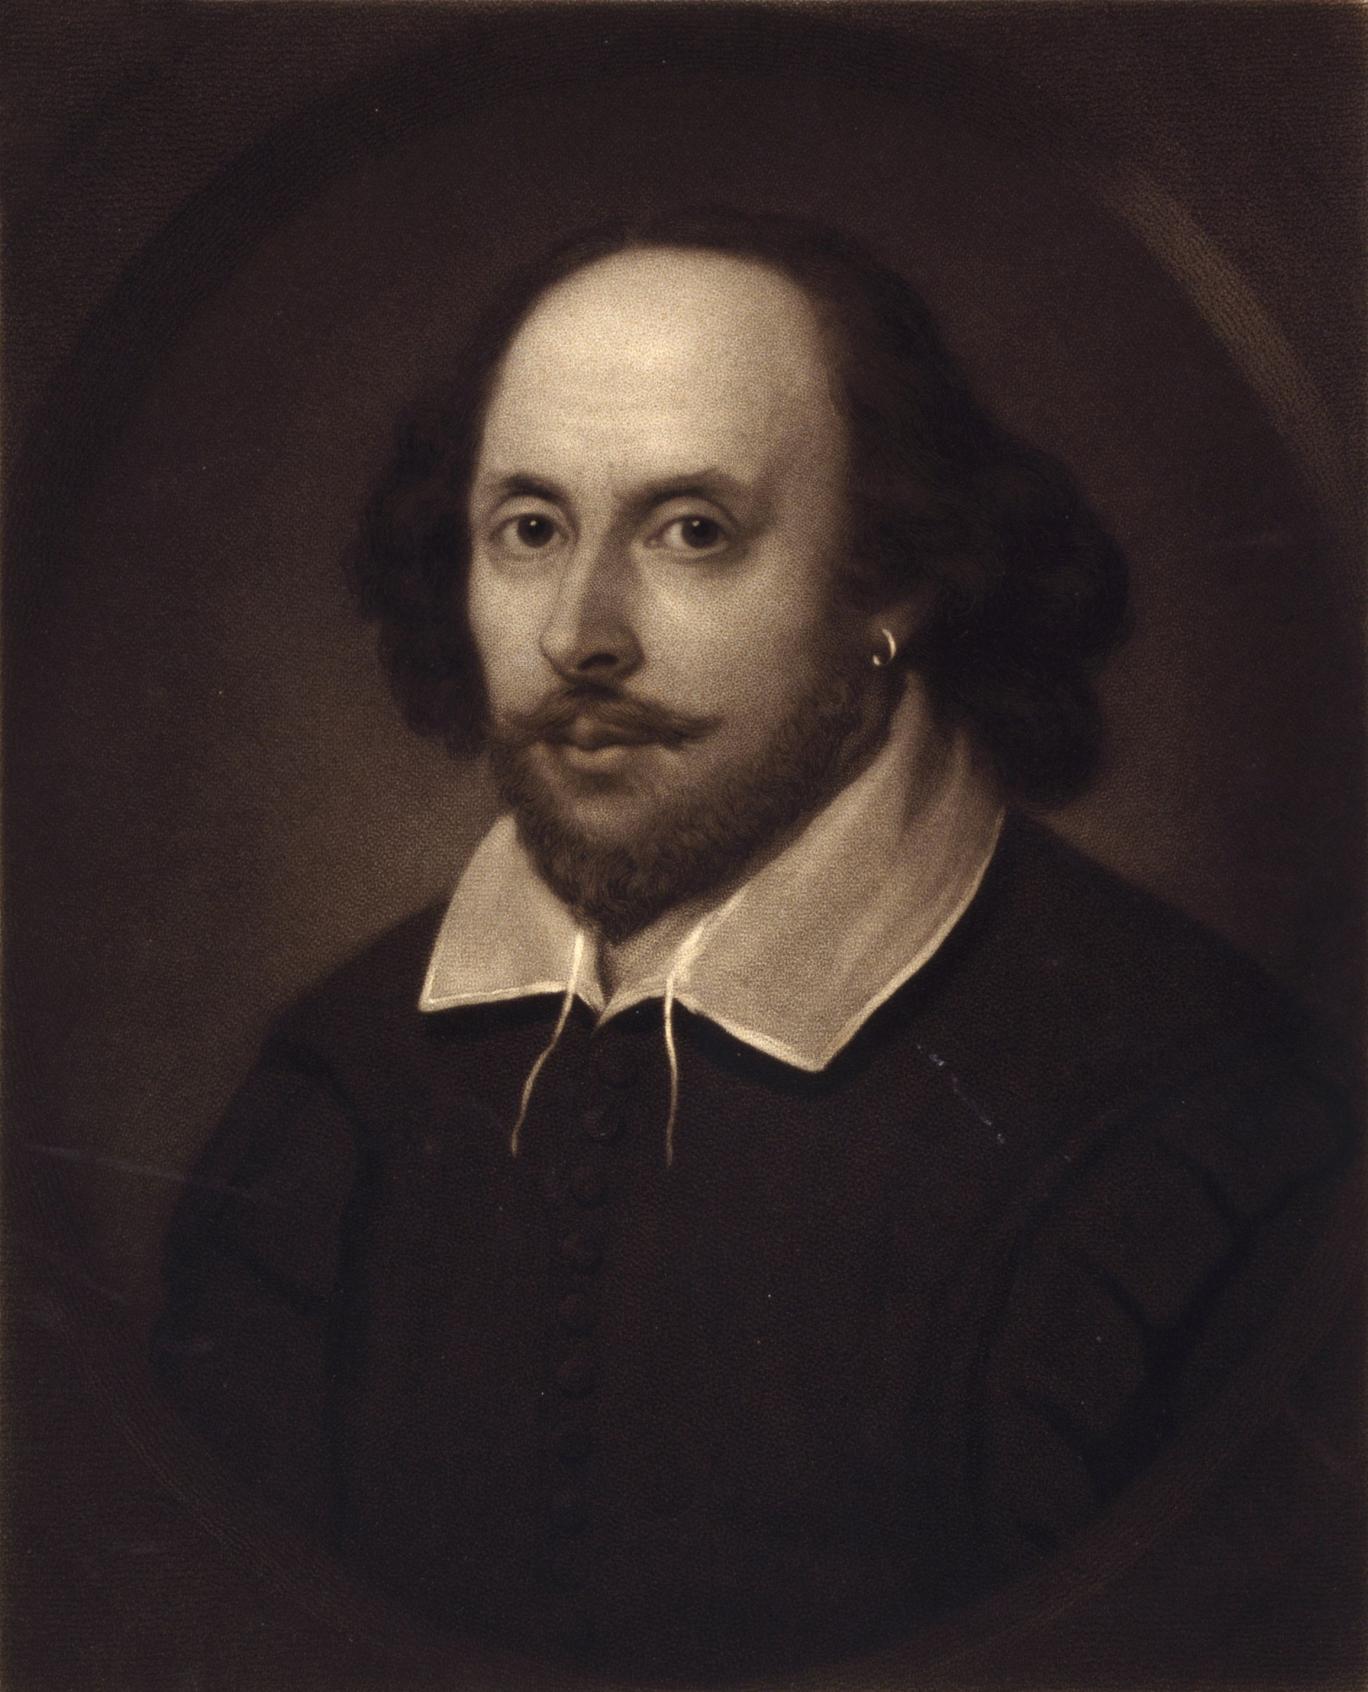 How Did Shakespeare's Work Influence The Development Of The English Language?